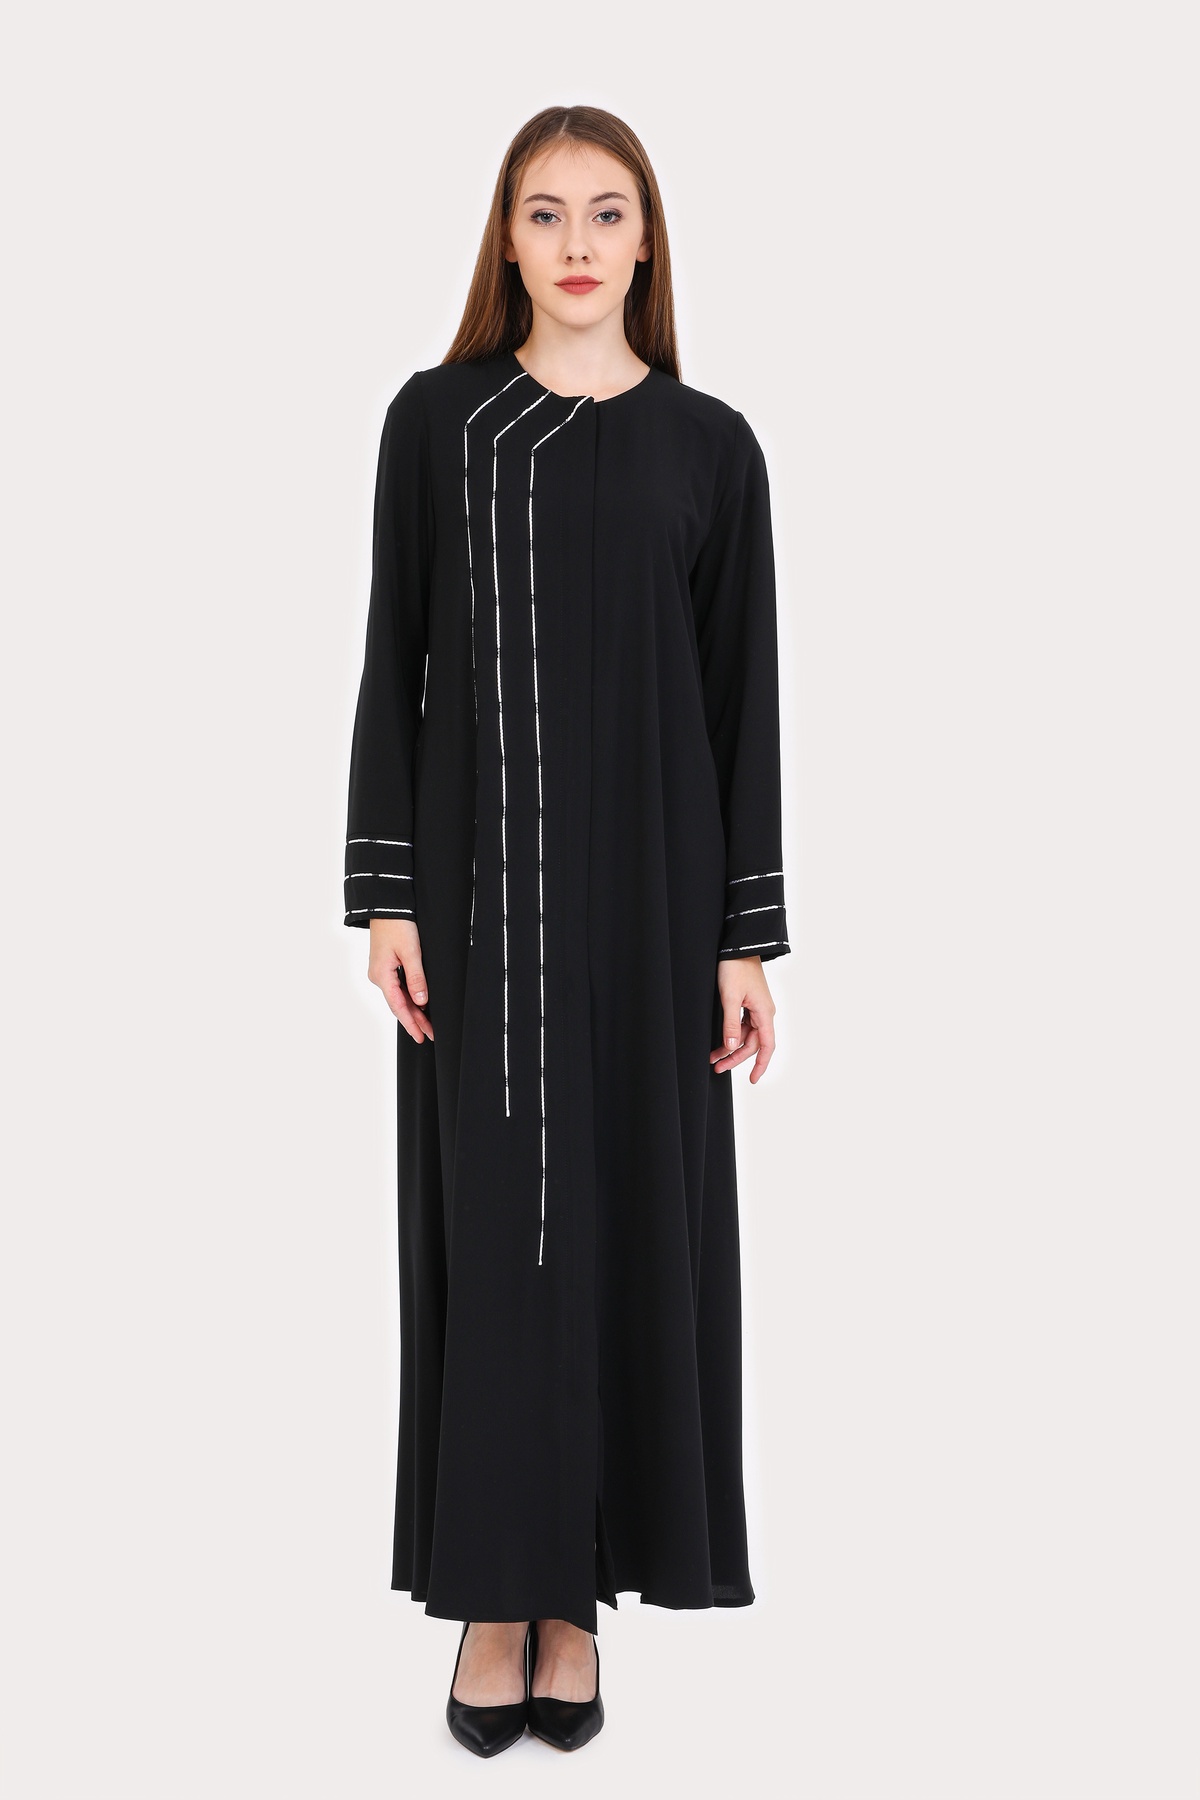 How to Look Classy in Abaya